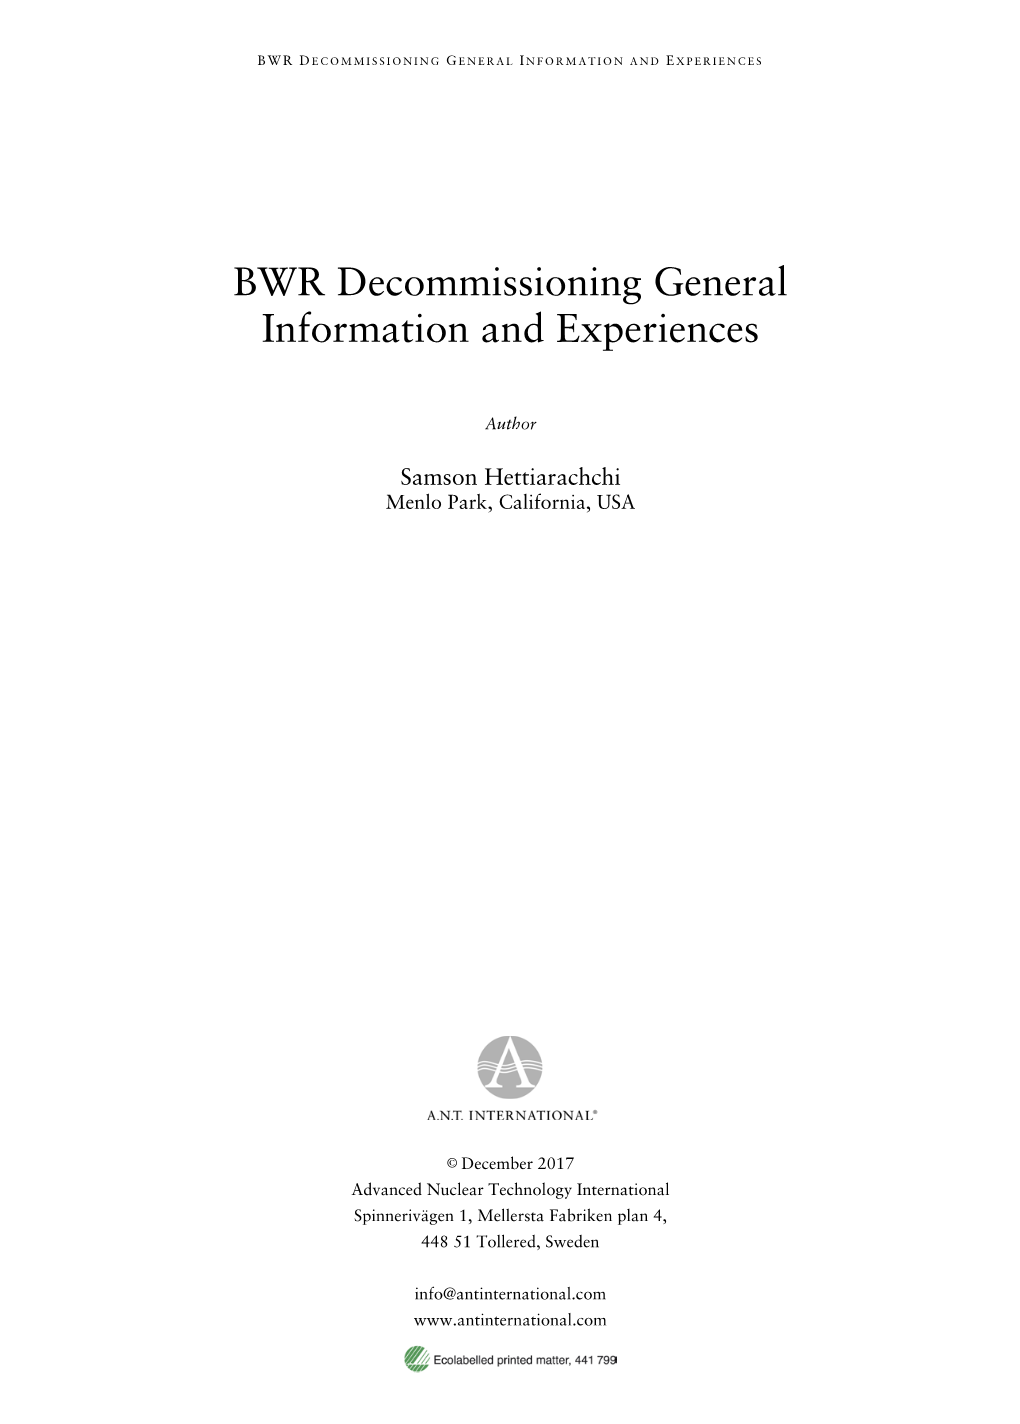 BWR Decommissioning General Information and Experiences